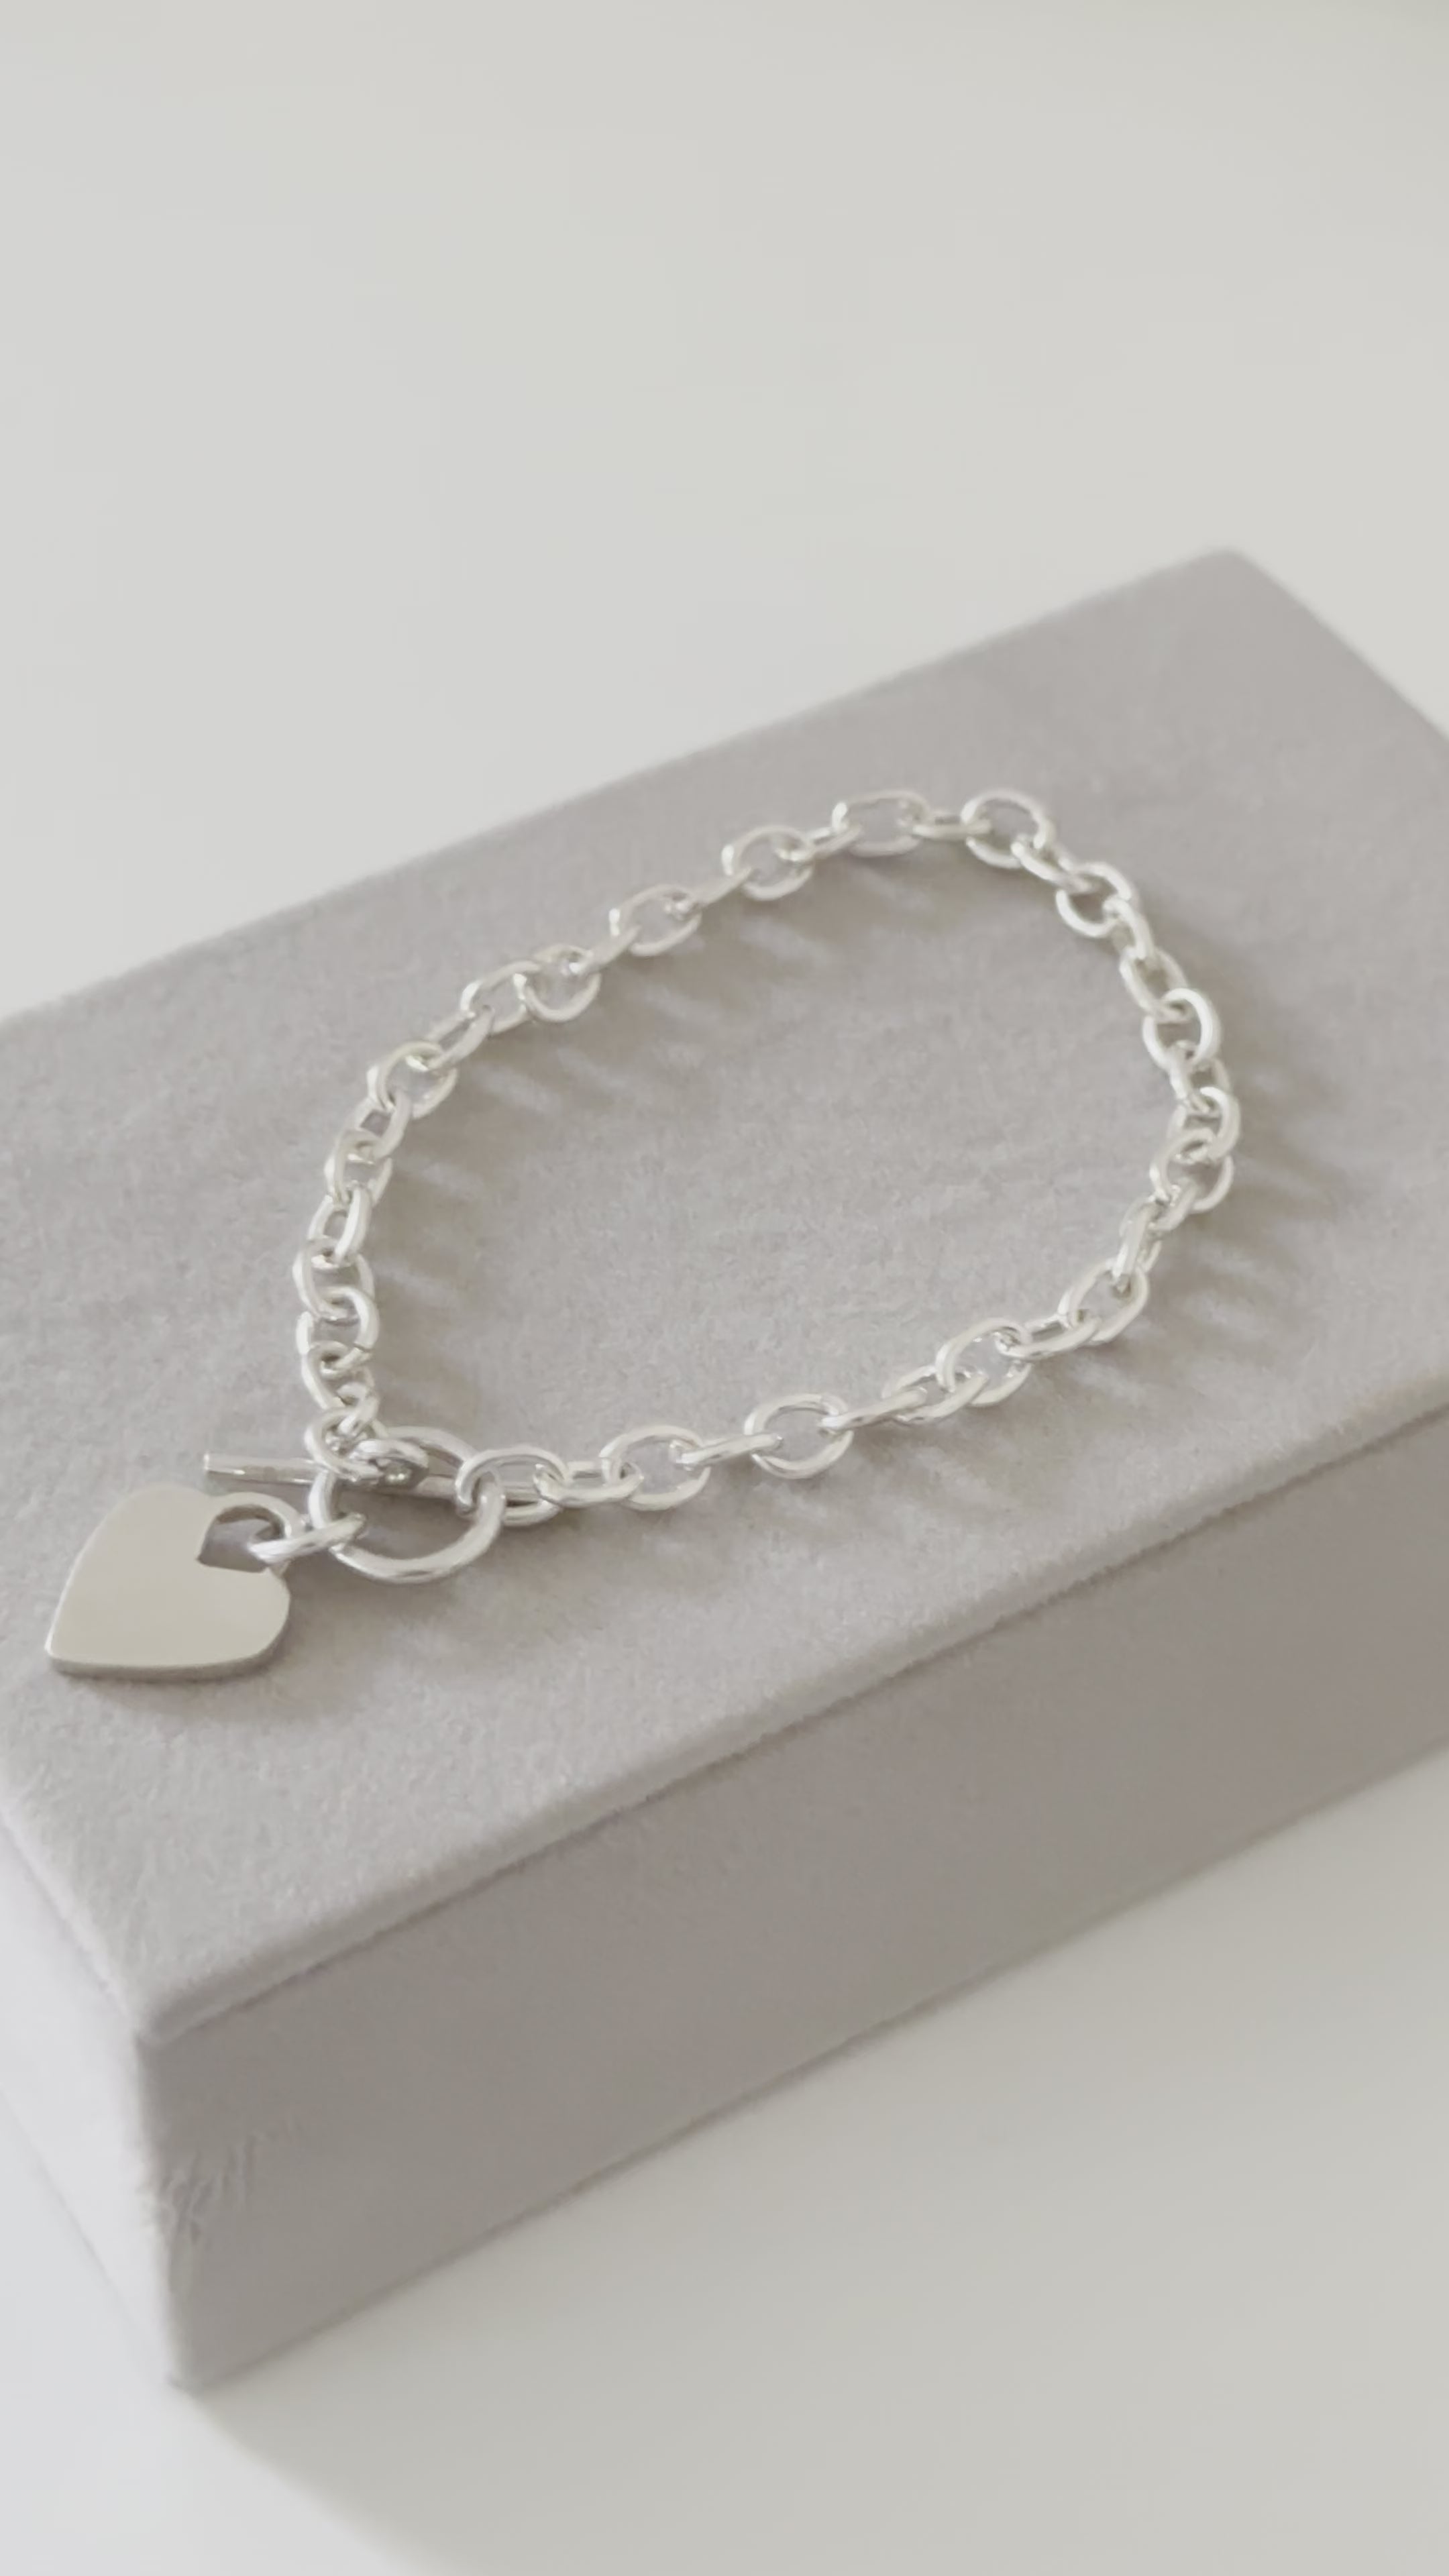 Sterling Silver Bracelet with Fine Oval Links and a Heart Charm